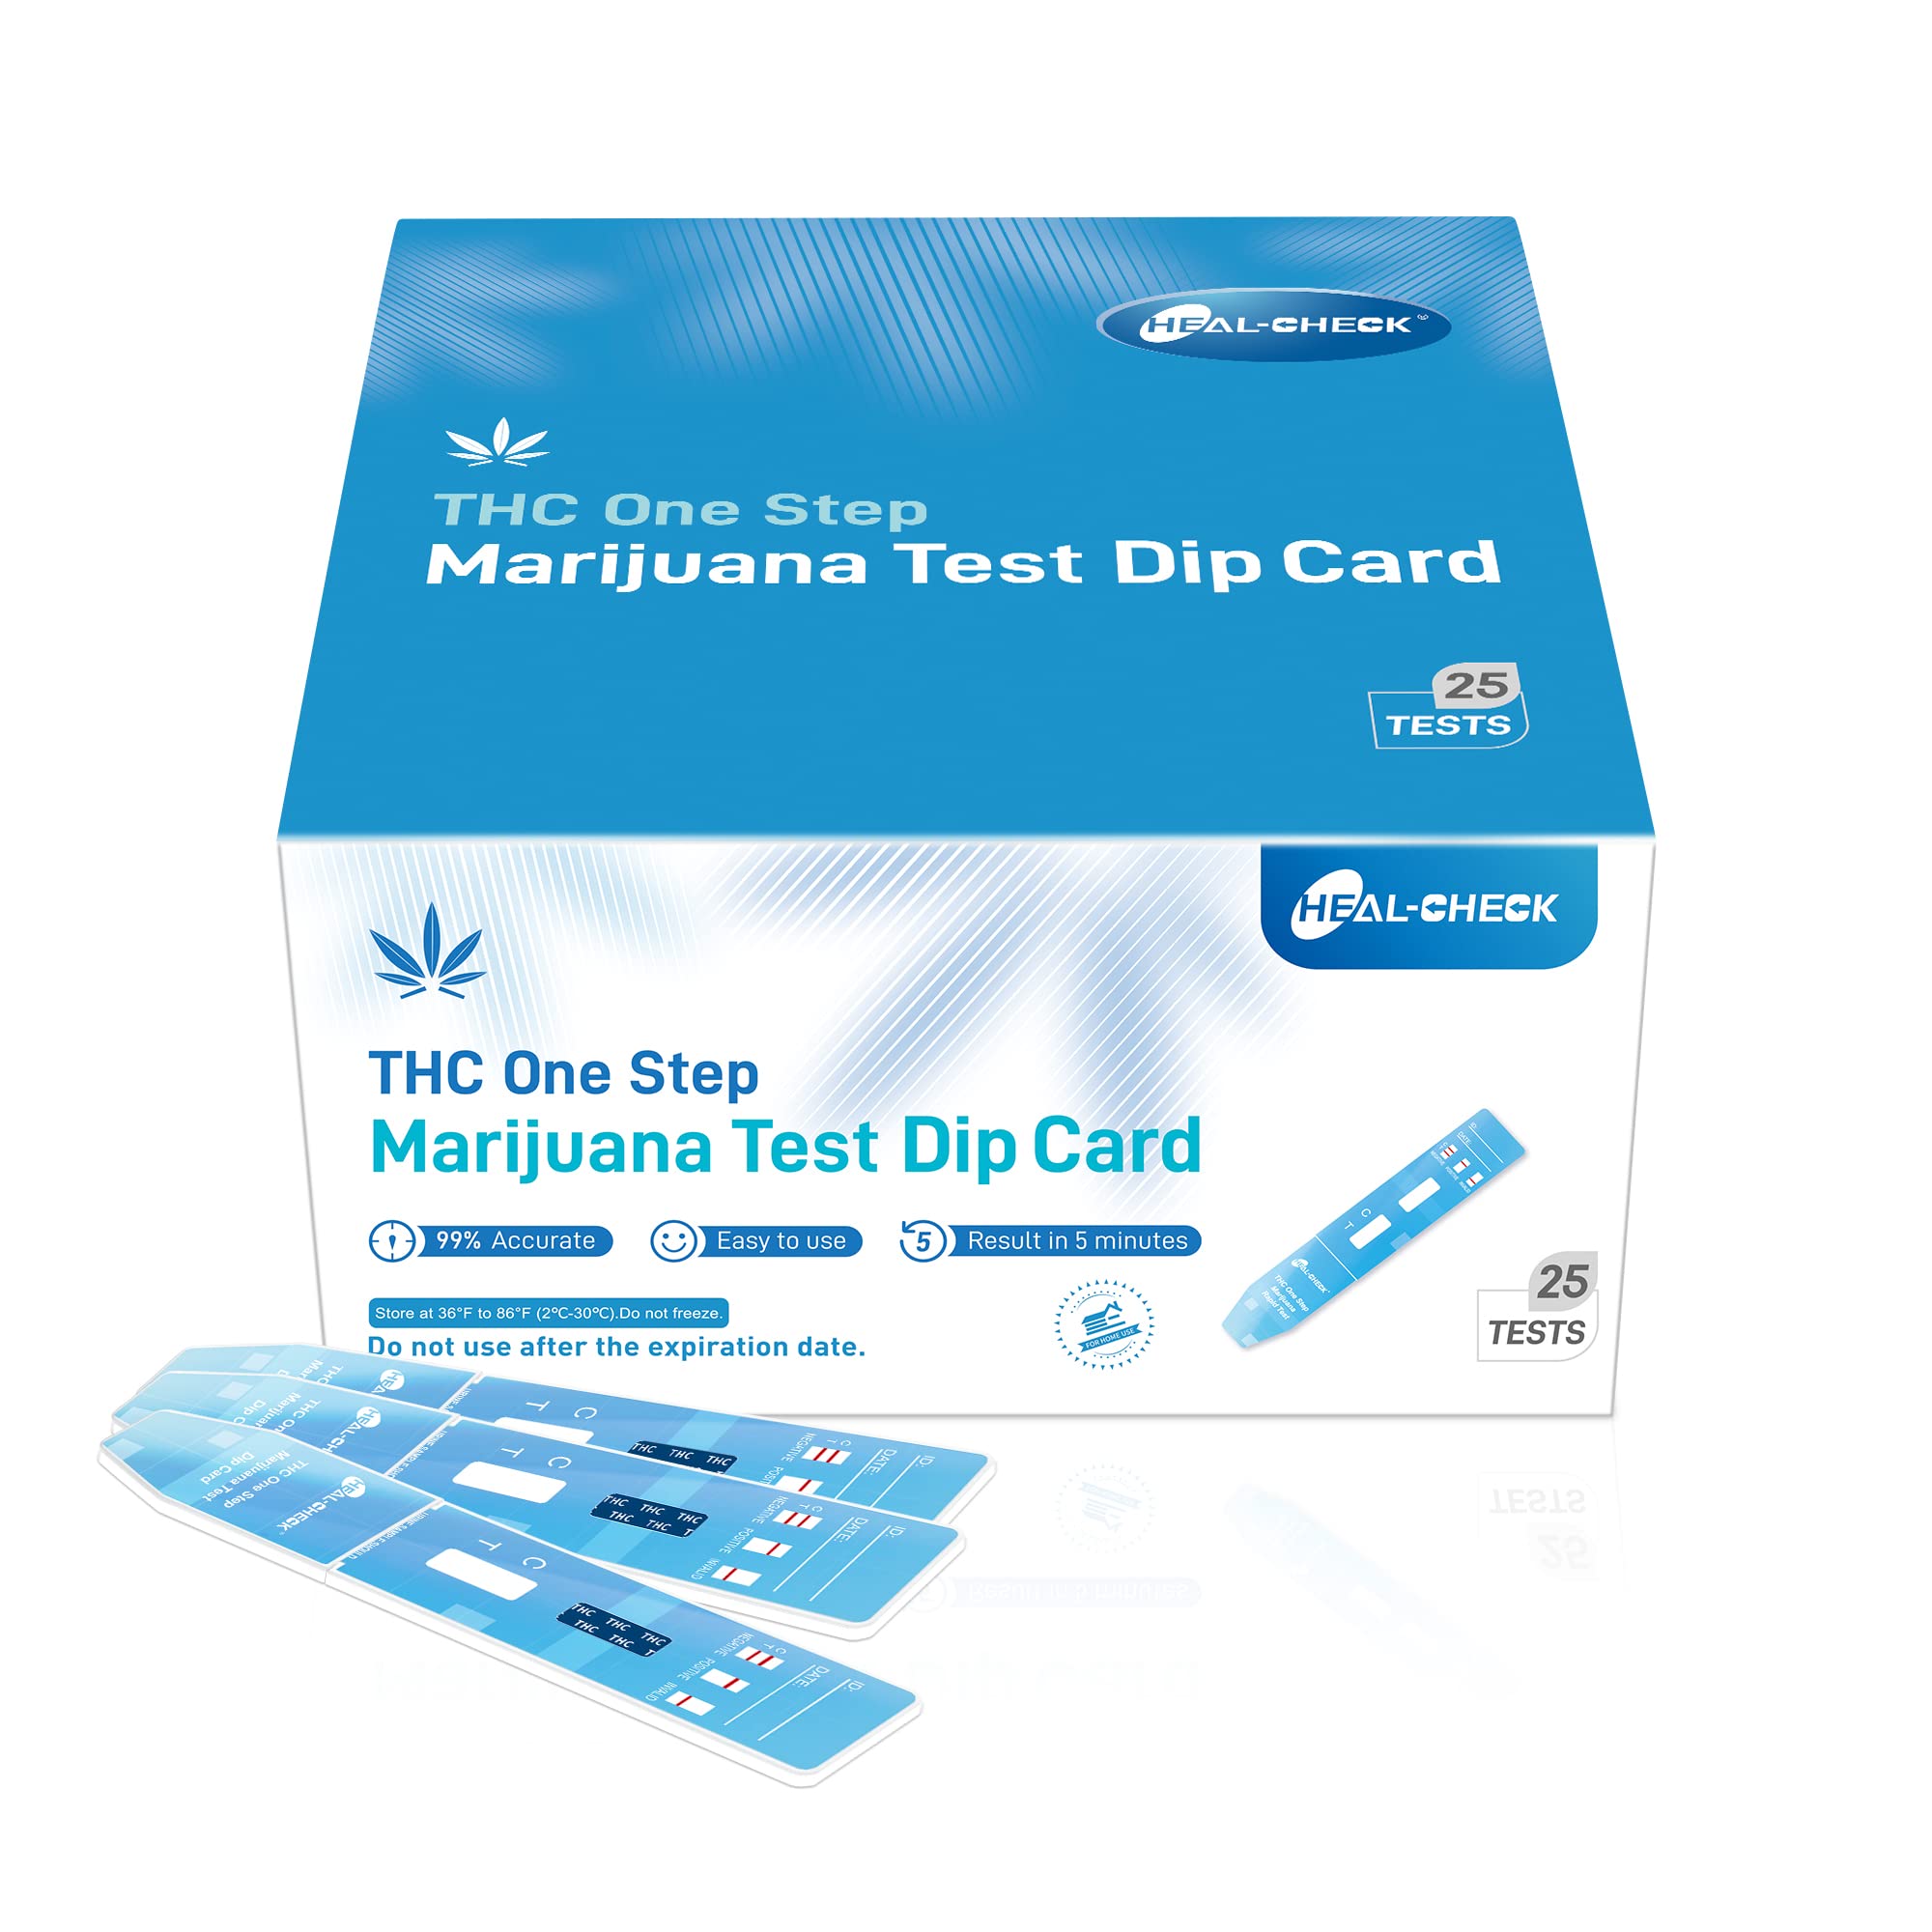 Drug Test Kit Marijuana, Individually Wrapped Single Panel THC Screen Urine Drug  Test Kit with 50 ng/ml Cut Off Level, Marijuana Drug Test for Home Use,  Accurate Results in 5 Minutes - 25 Strips